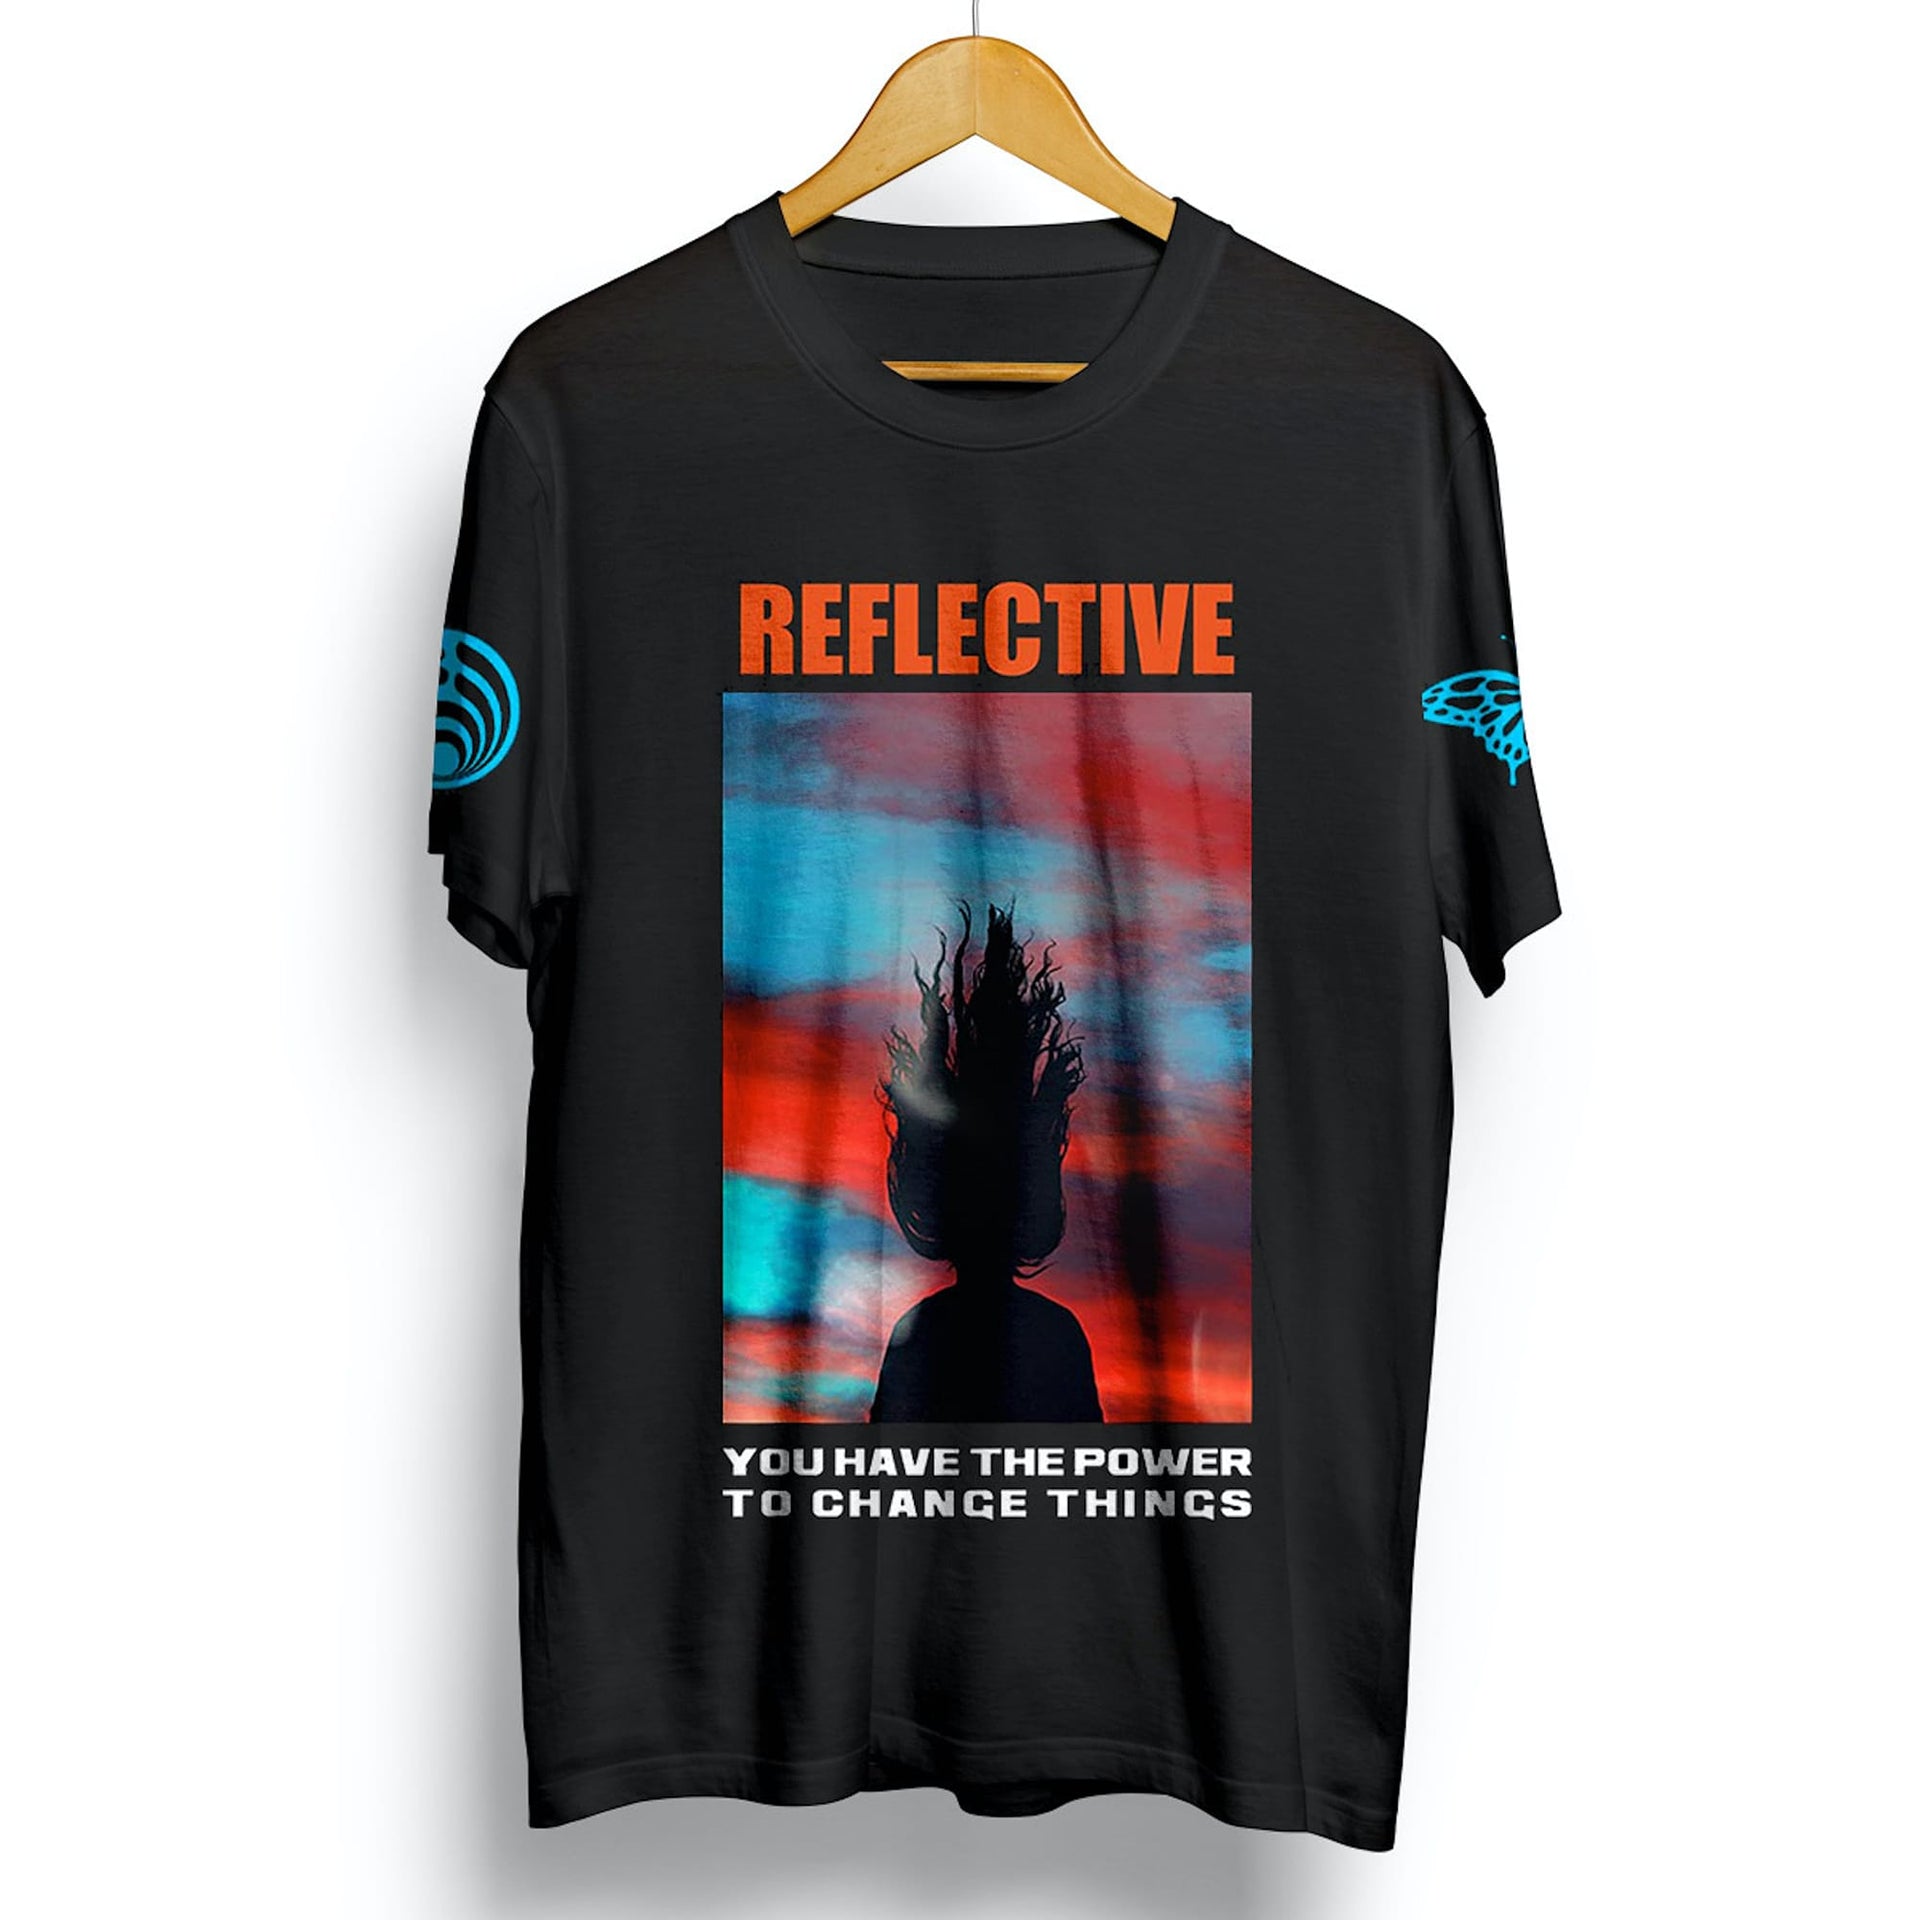 Reflective Part 3 tee in black